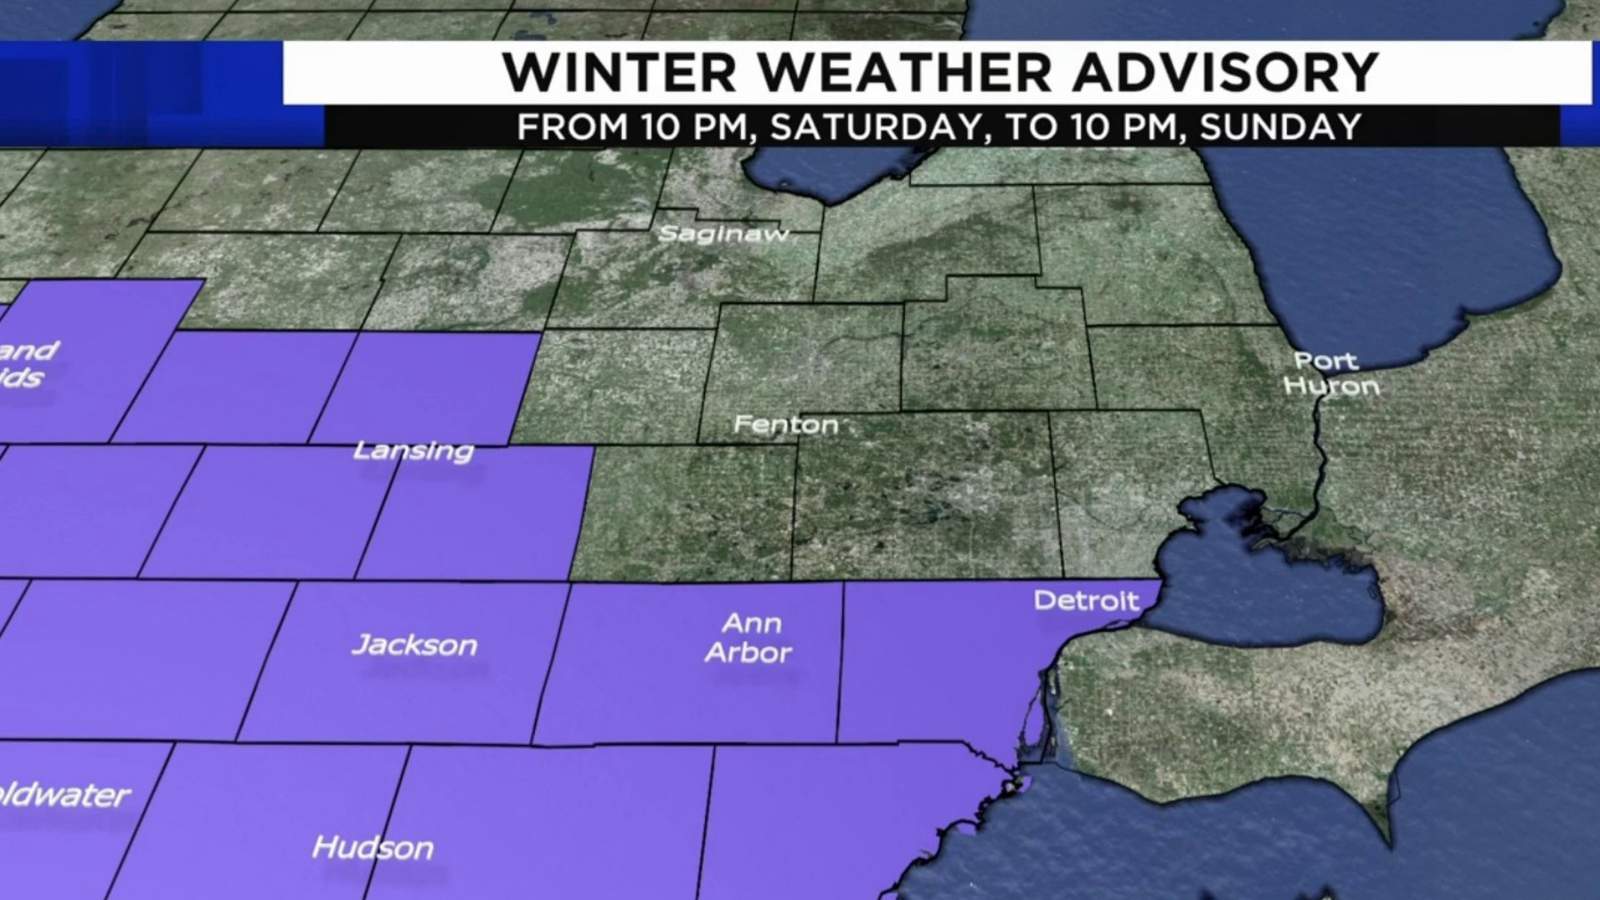 Winter weather advisory issued for Metro Detroit until 10 p.m. Sunday